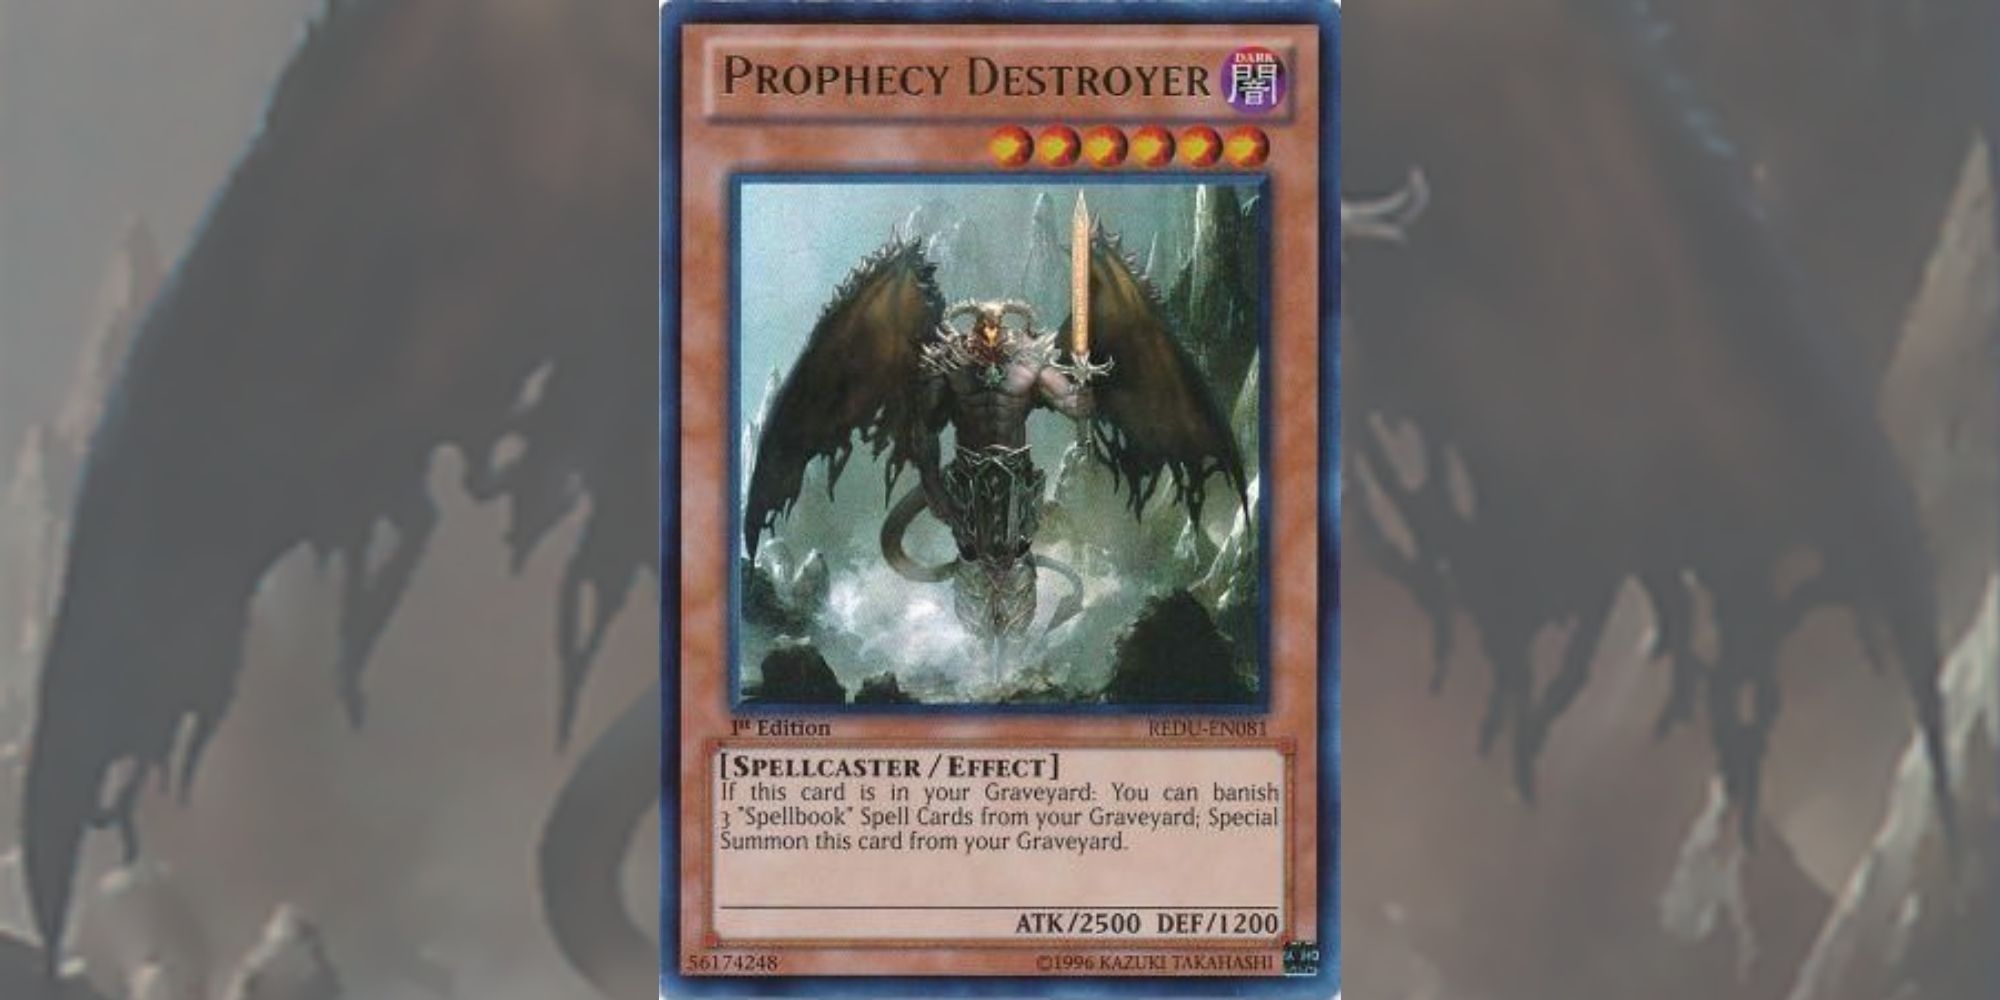 Yu-Gi-Oh! Card Prophecy Destroyer against background made from card art.